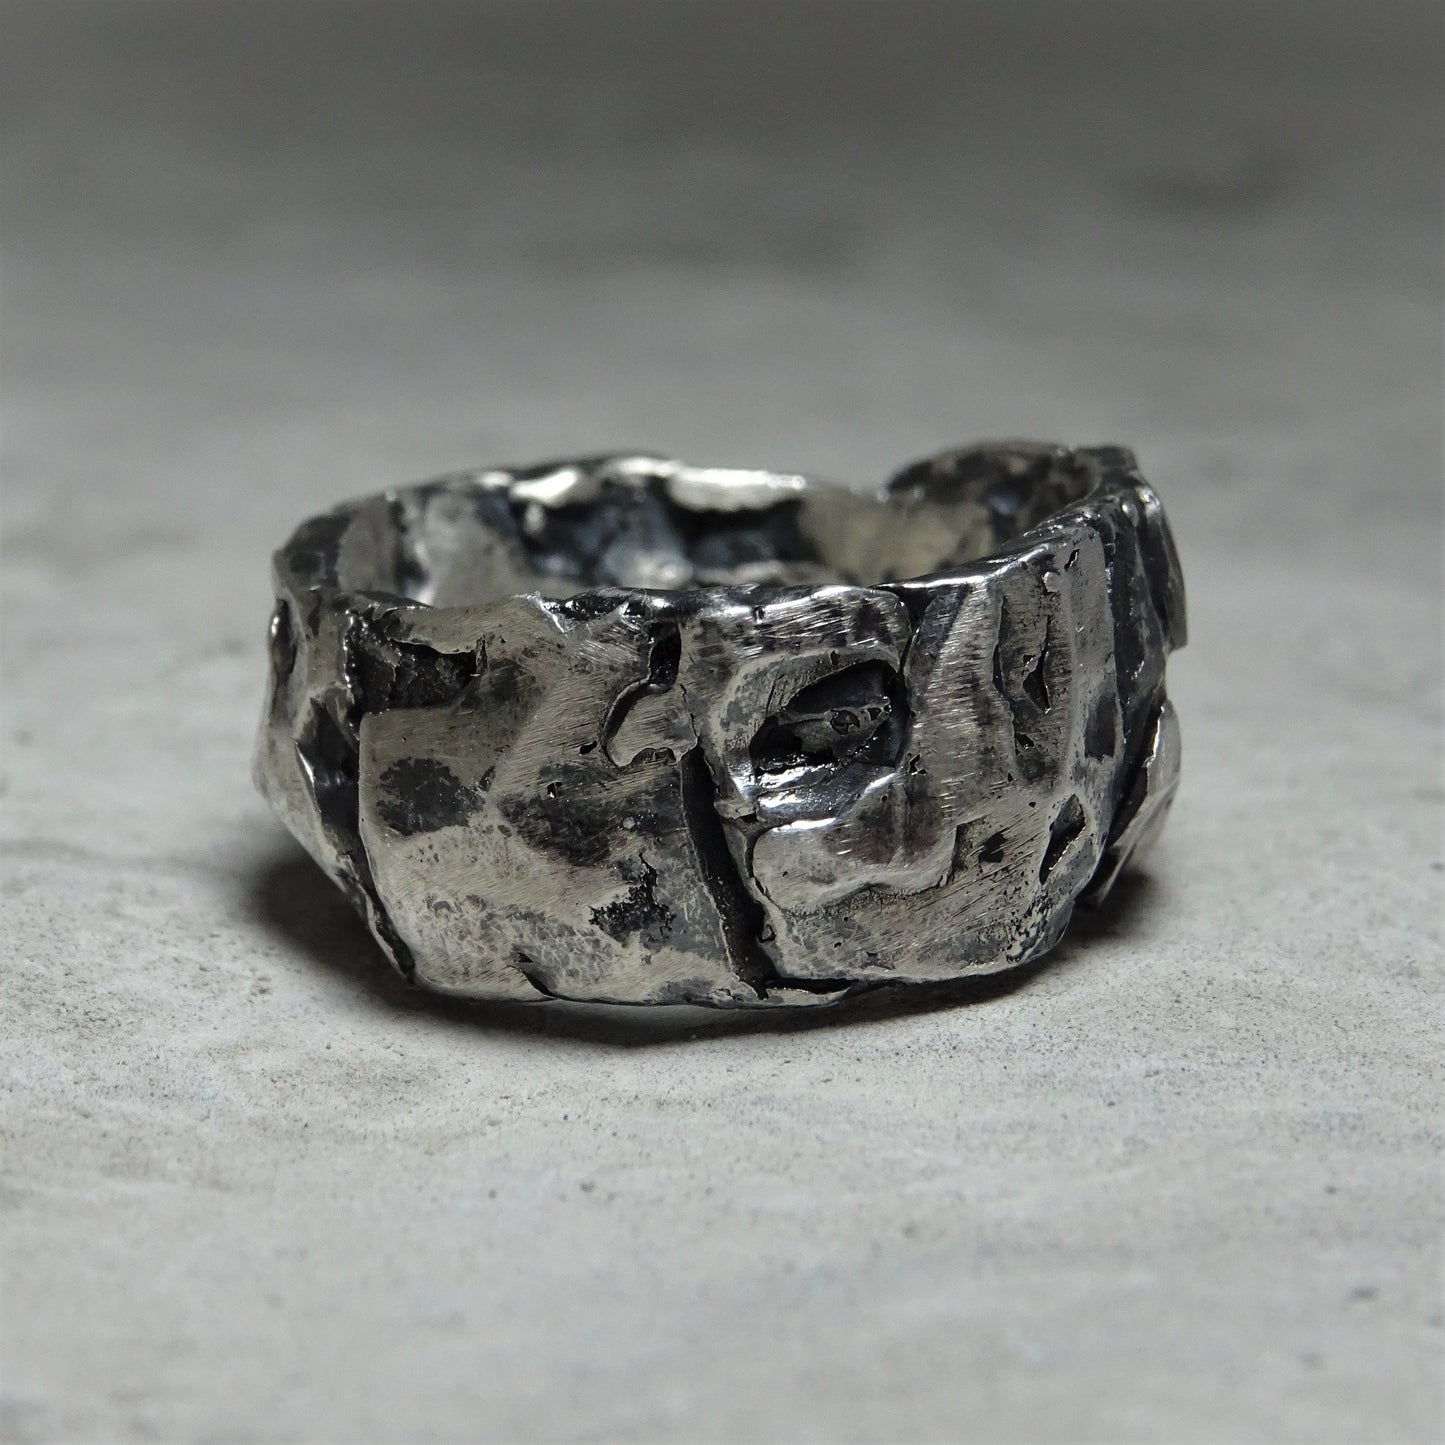 Stratum ring- a band ring with an unusual multi-layered texture Band rings Project50g 